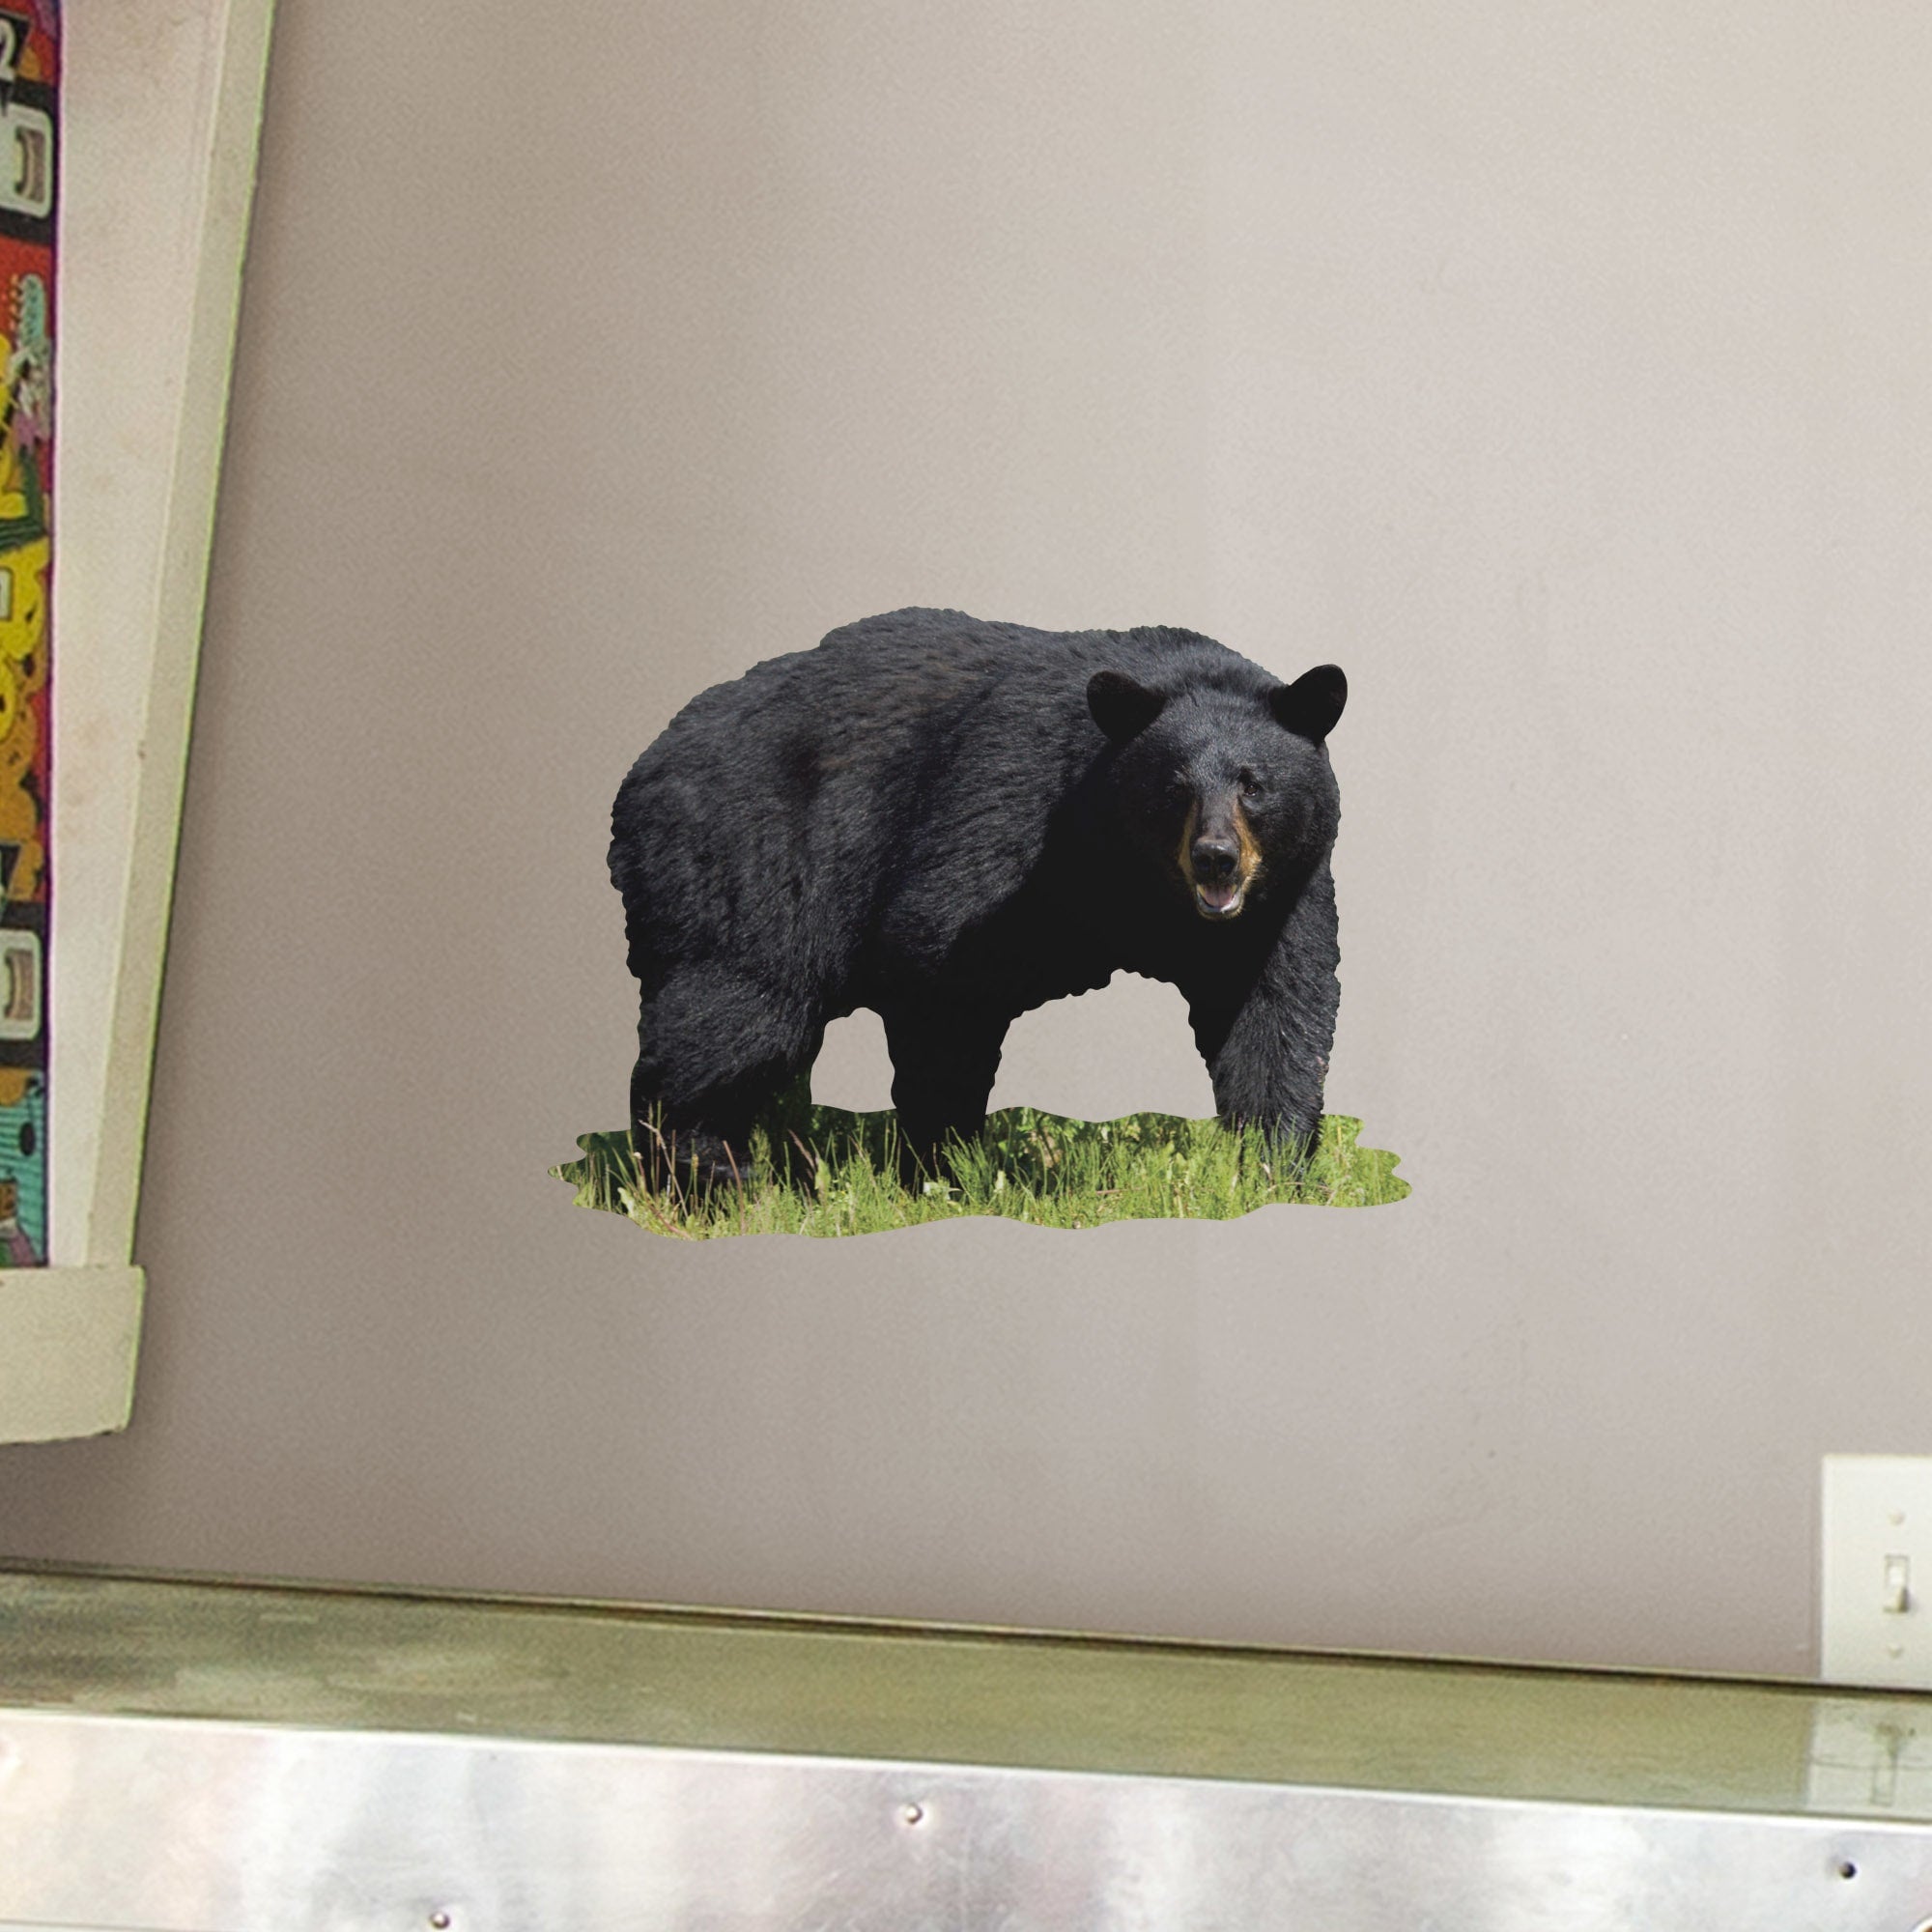 Black Bear - Removable Vinyl Decal Large by Fathead